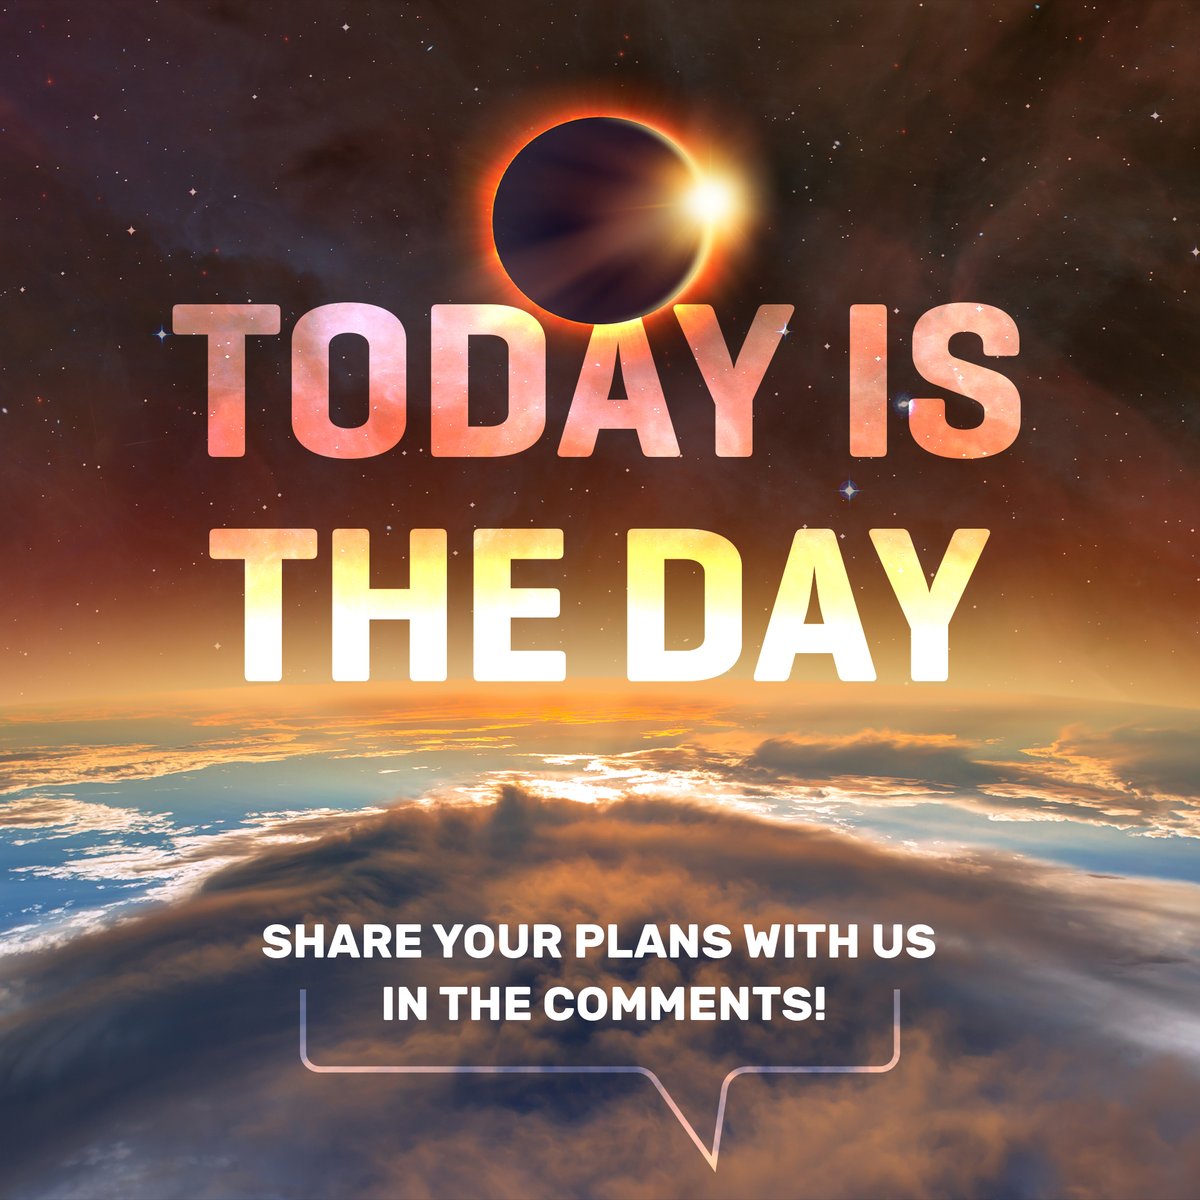 Turn around, Bright Eyes, because today’s the day! April 8th brings us a total eclipse of the heart... and the sky! We hope you’re ready for an out-of-this-world, TOTALLY awesome solar eclipse. Share how you plan to celebrate in the comments below!🌑🌞